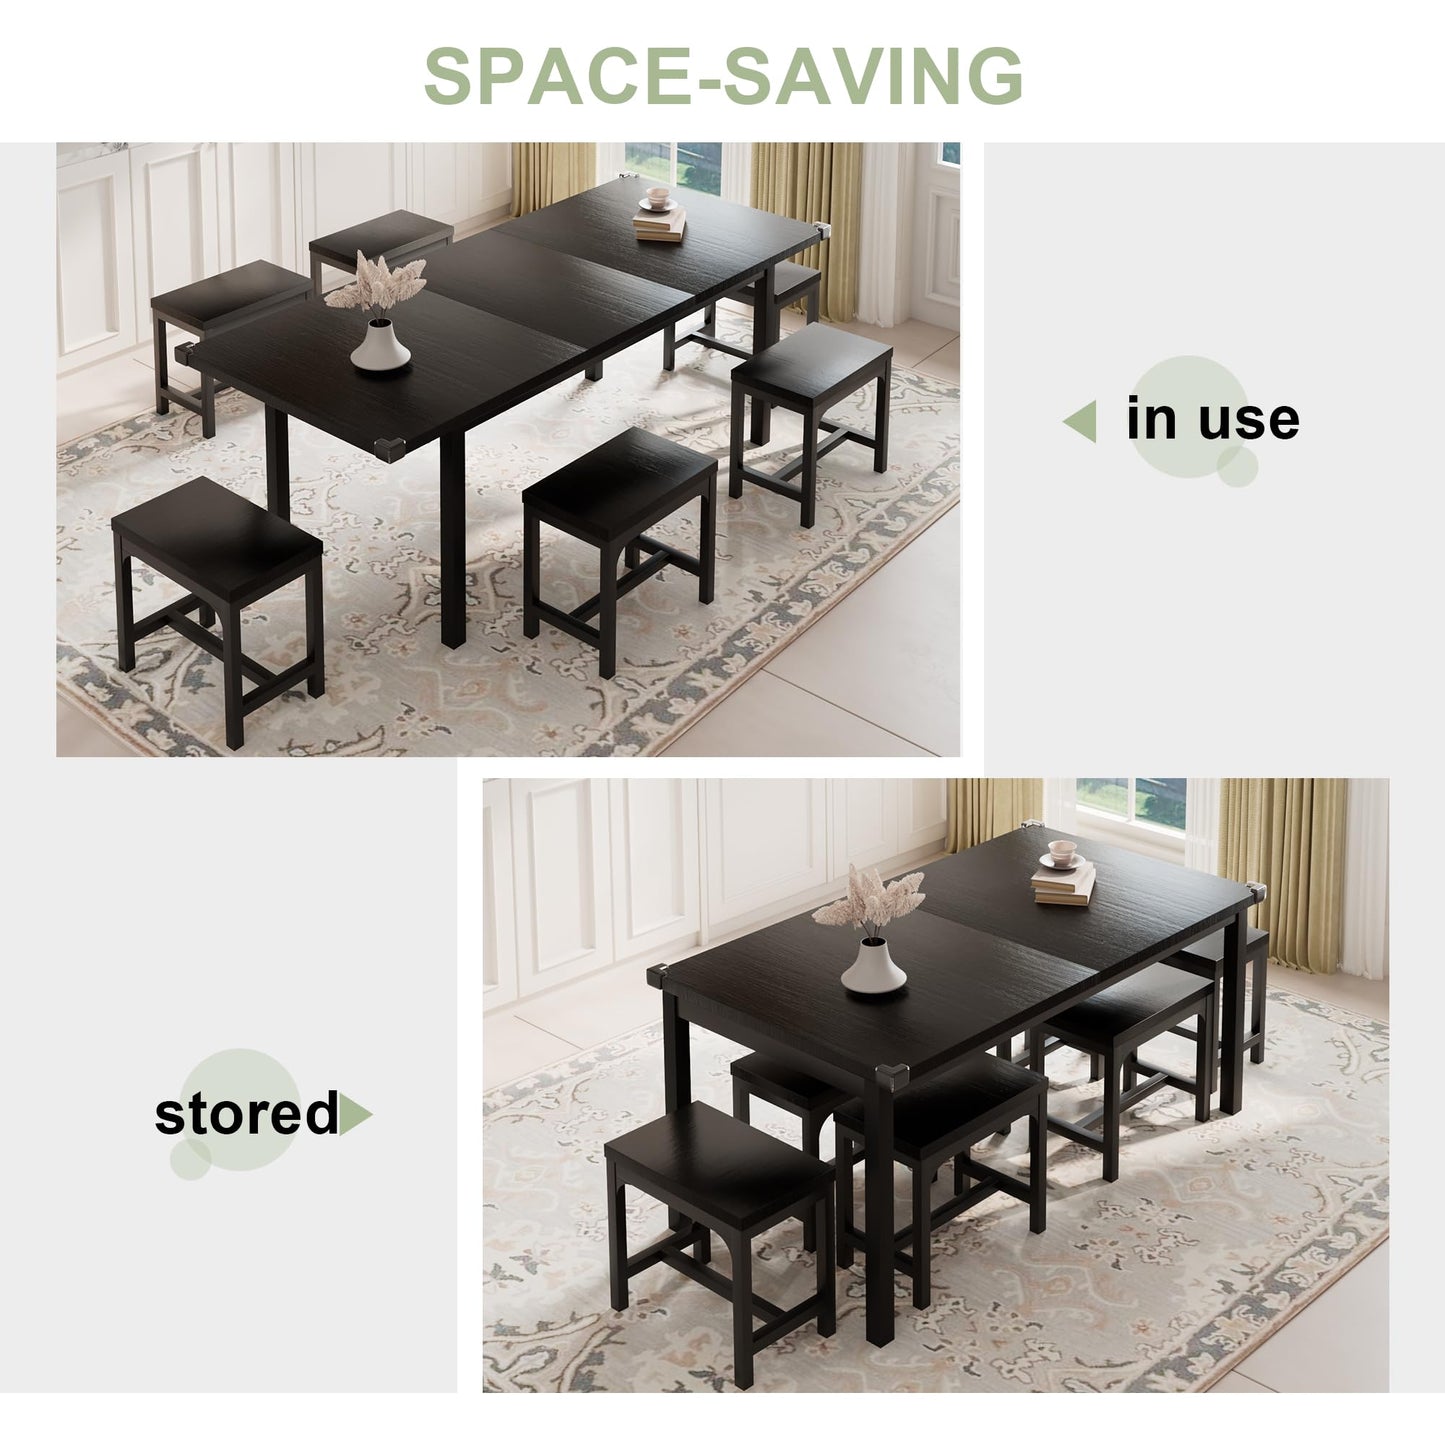 Feonase 7-Piece Dining Table Set with 6 Stools, 63" Large Extendable Kitchen Table Set for 4-8, Mid-Century Dining Room Table with Heavy-Duty Frame, Easy Assembly, Black